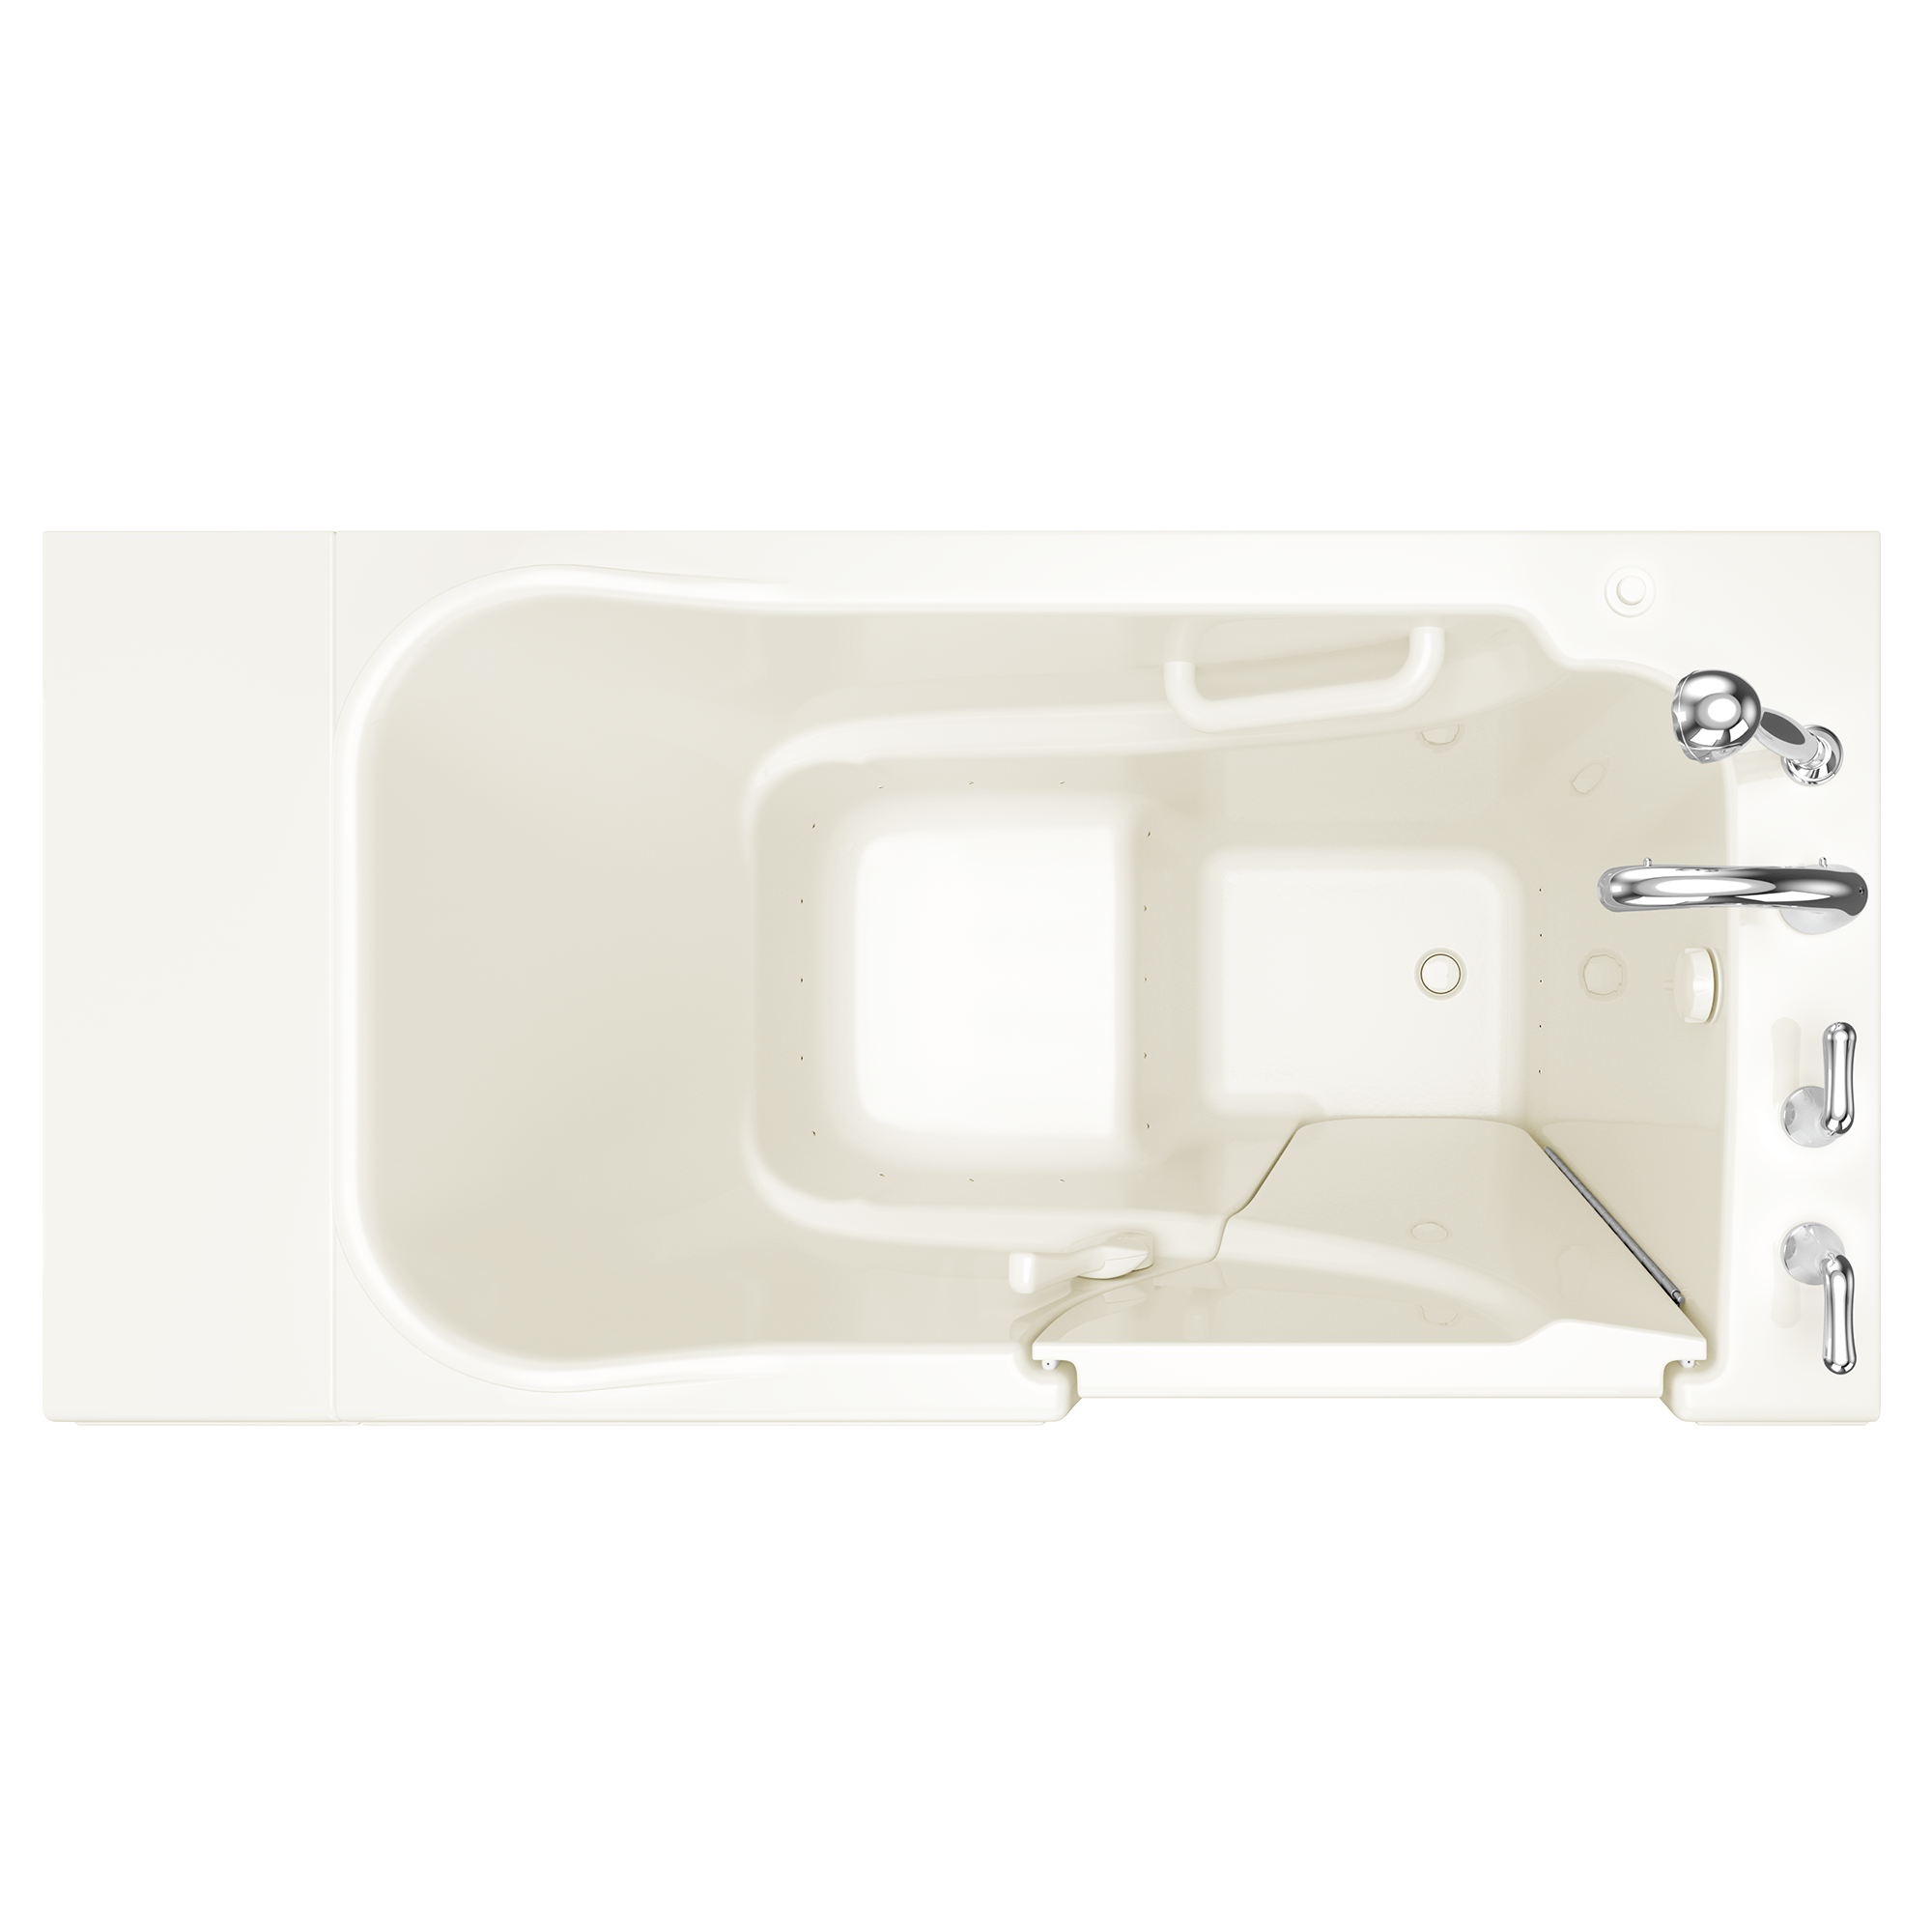 Gelcoat Entry Series 52 x 30 Inch Walk In Tub With Air Spa System - Right Hand Drain With Faucet BISCUIT